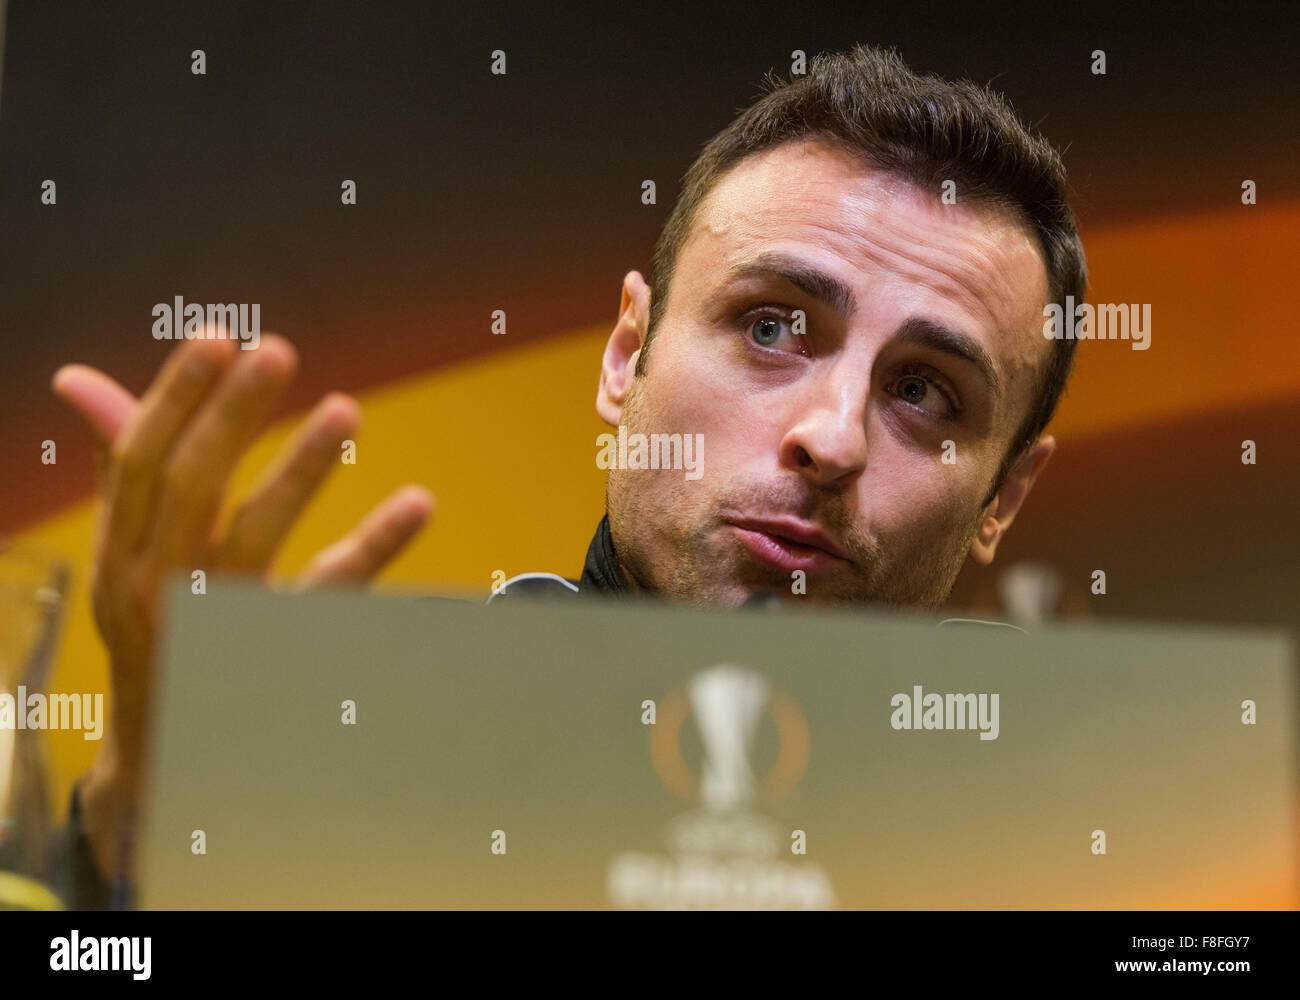 Dortmund, Germany. 09th Dec, 2015. PAOK's Dimitar Berbatov during a press conference in Dortmund, Germany, 09 December 2015. PAOK Thessaoloniki will face Borussia Dortmund in the UEFA Europa League soccer match on 10 December 2015. Photo: BERND THISSEN/DPA/Alamy Live News Stock Photo